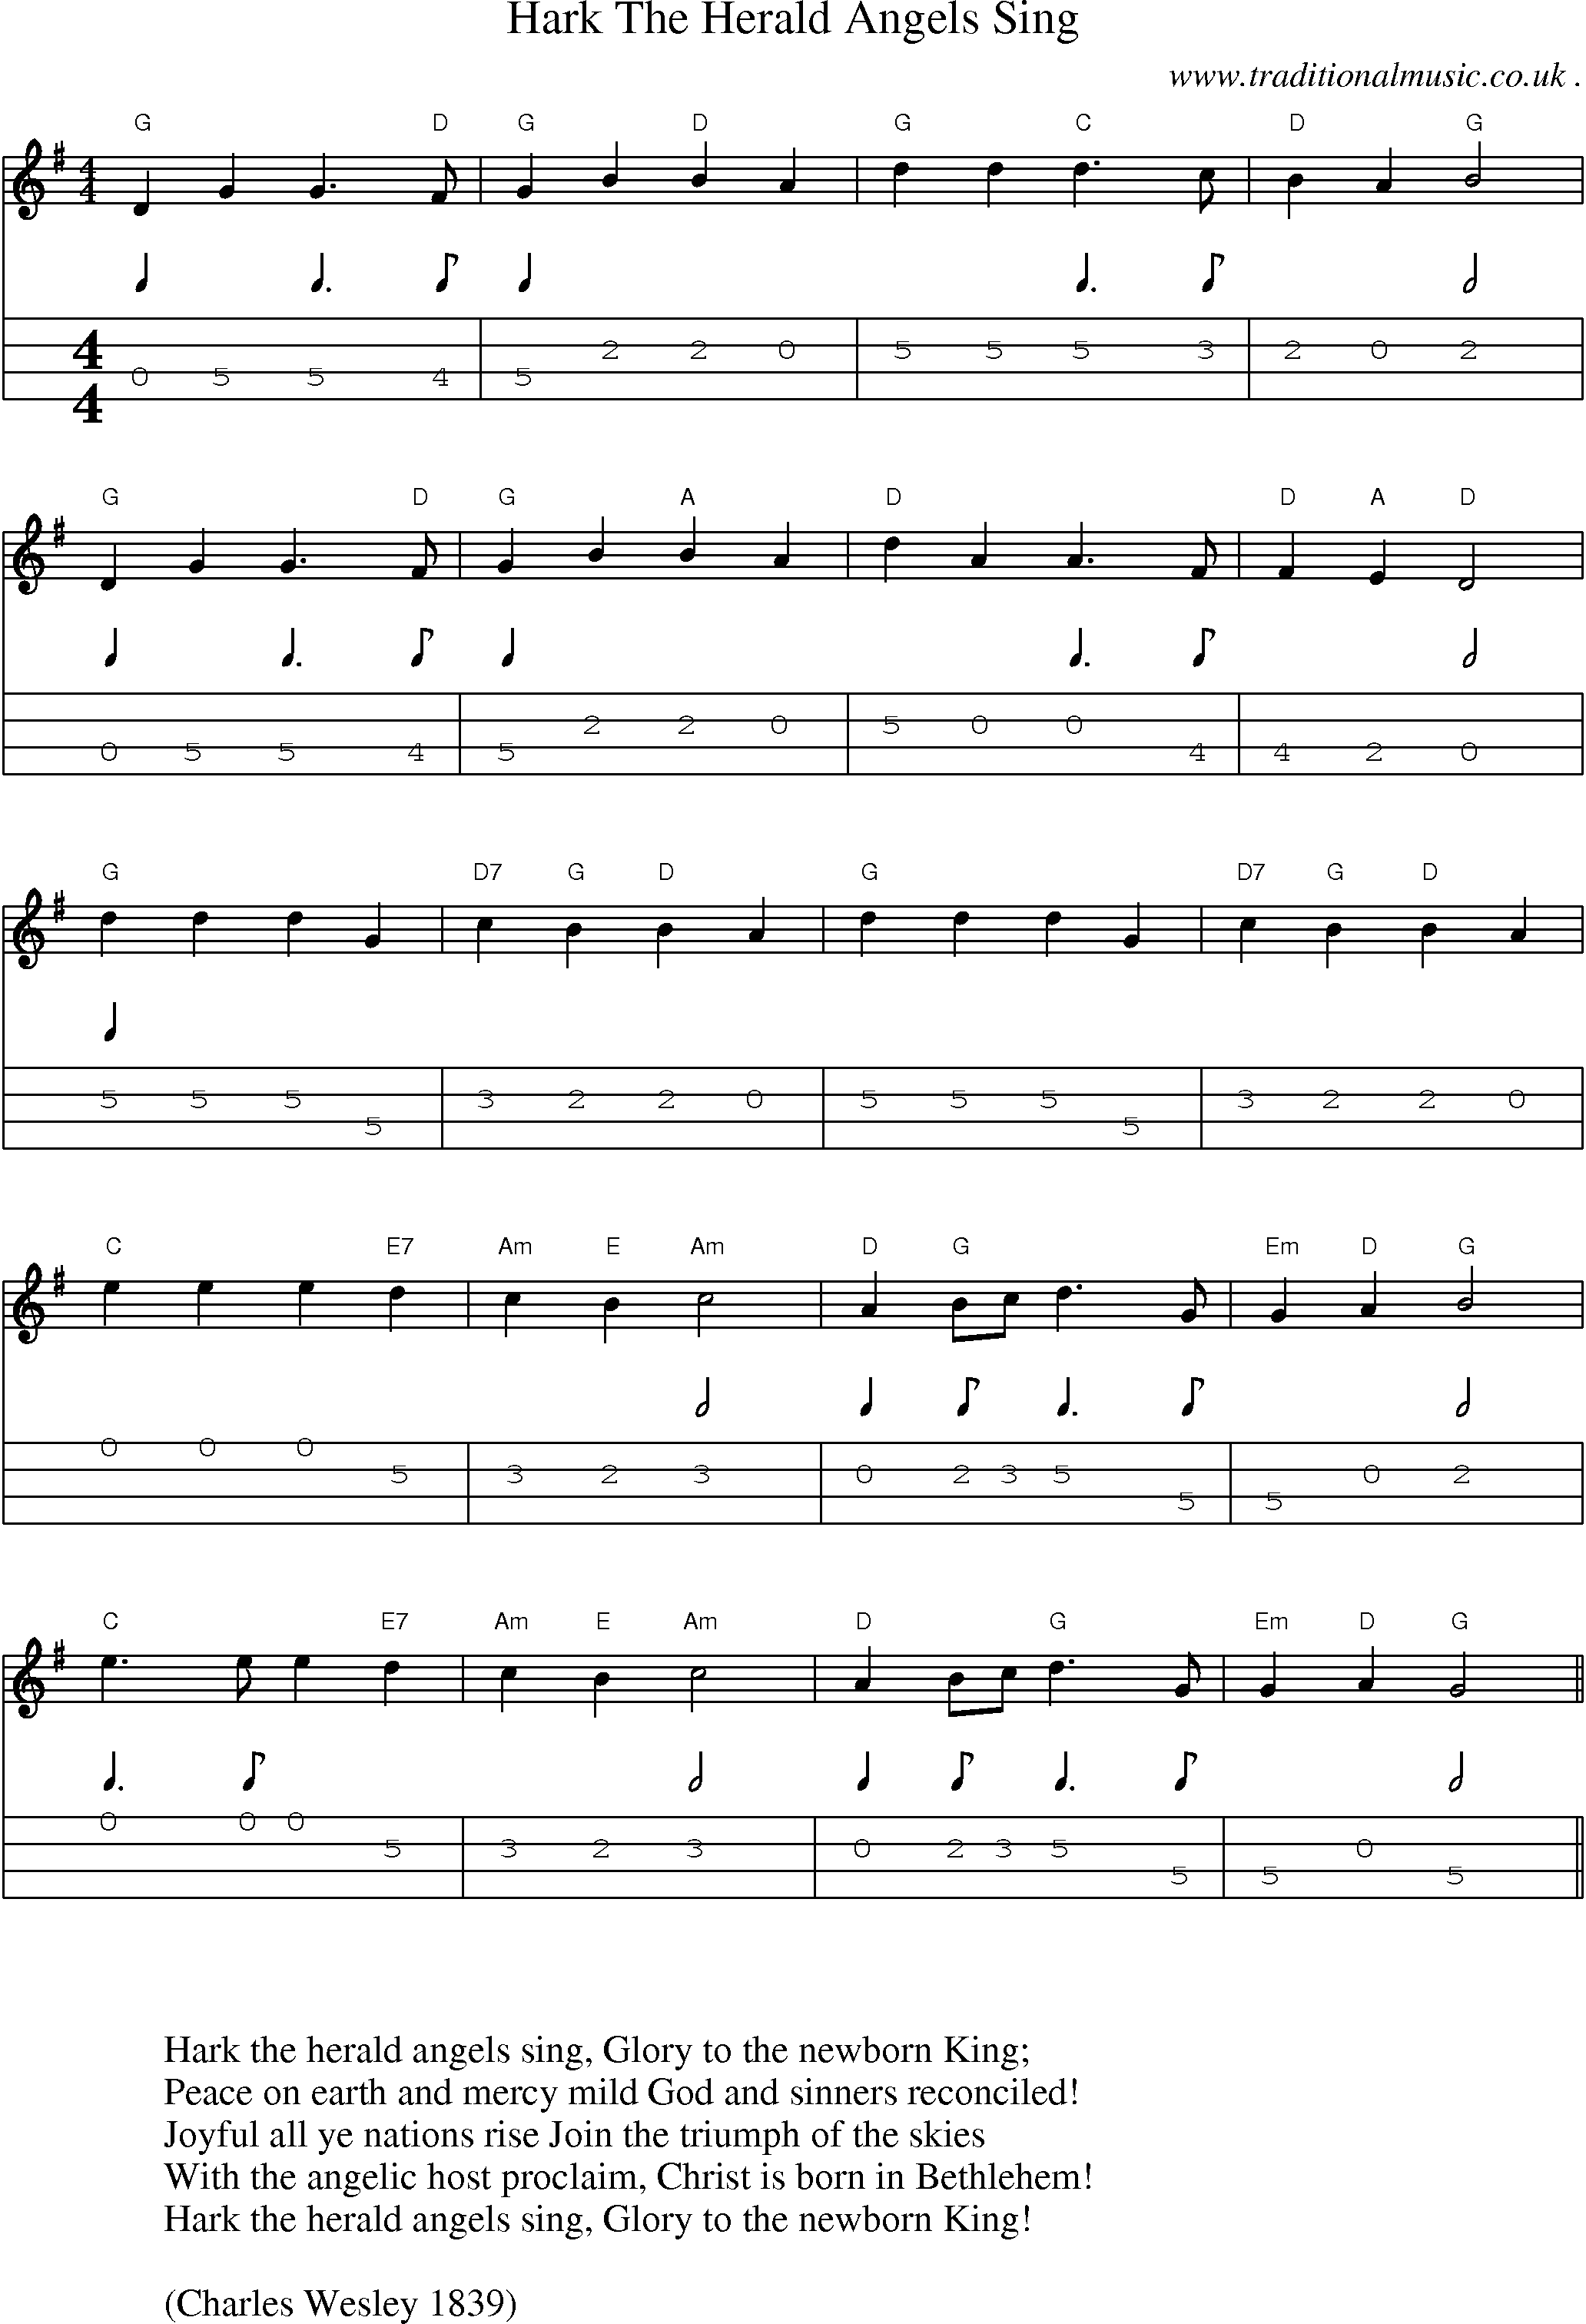 Music Score and Guitar Tabs for Hark The Herald Angels Sing